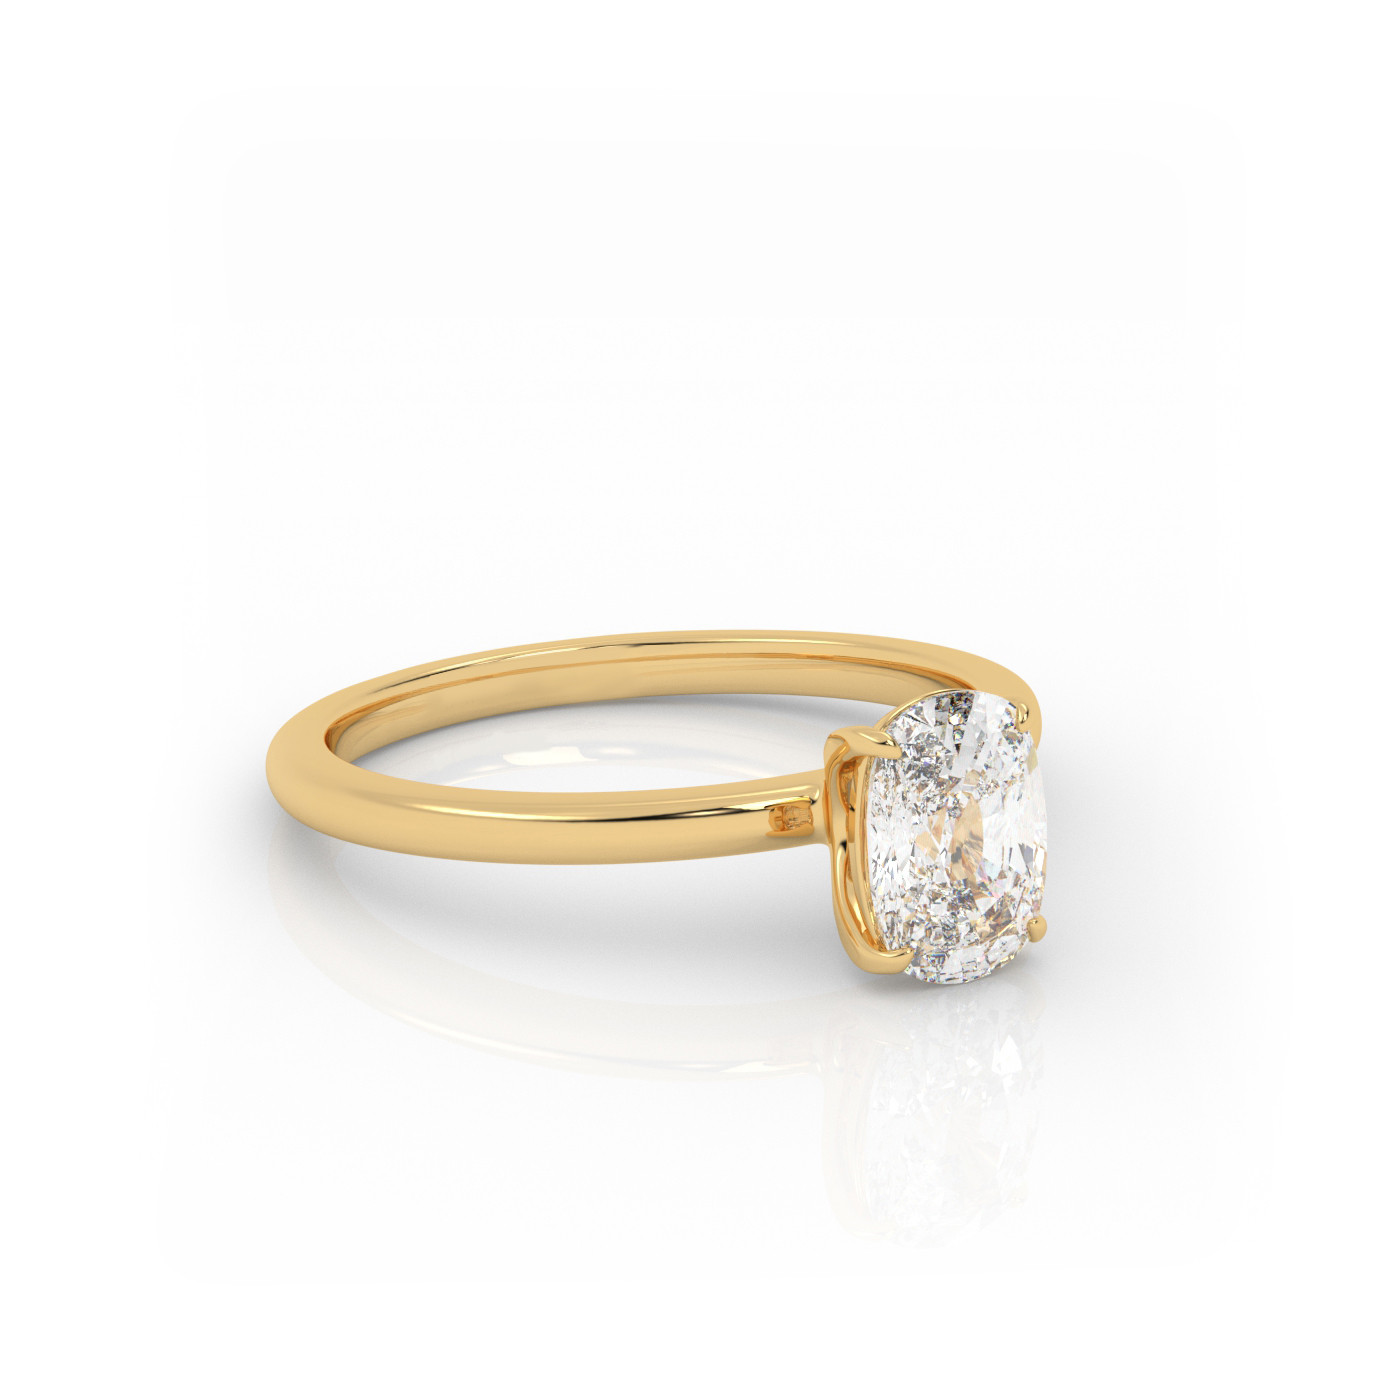 18K YELLOW GOLD Elongated Cushion Cut Classic Solitaire Engagement Ring